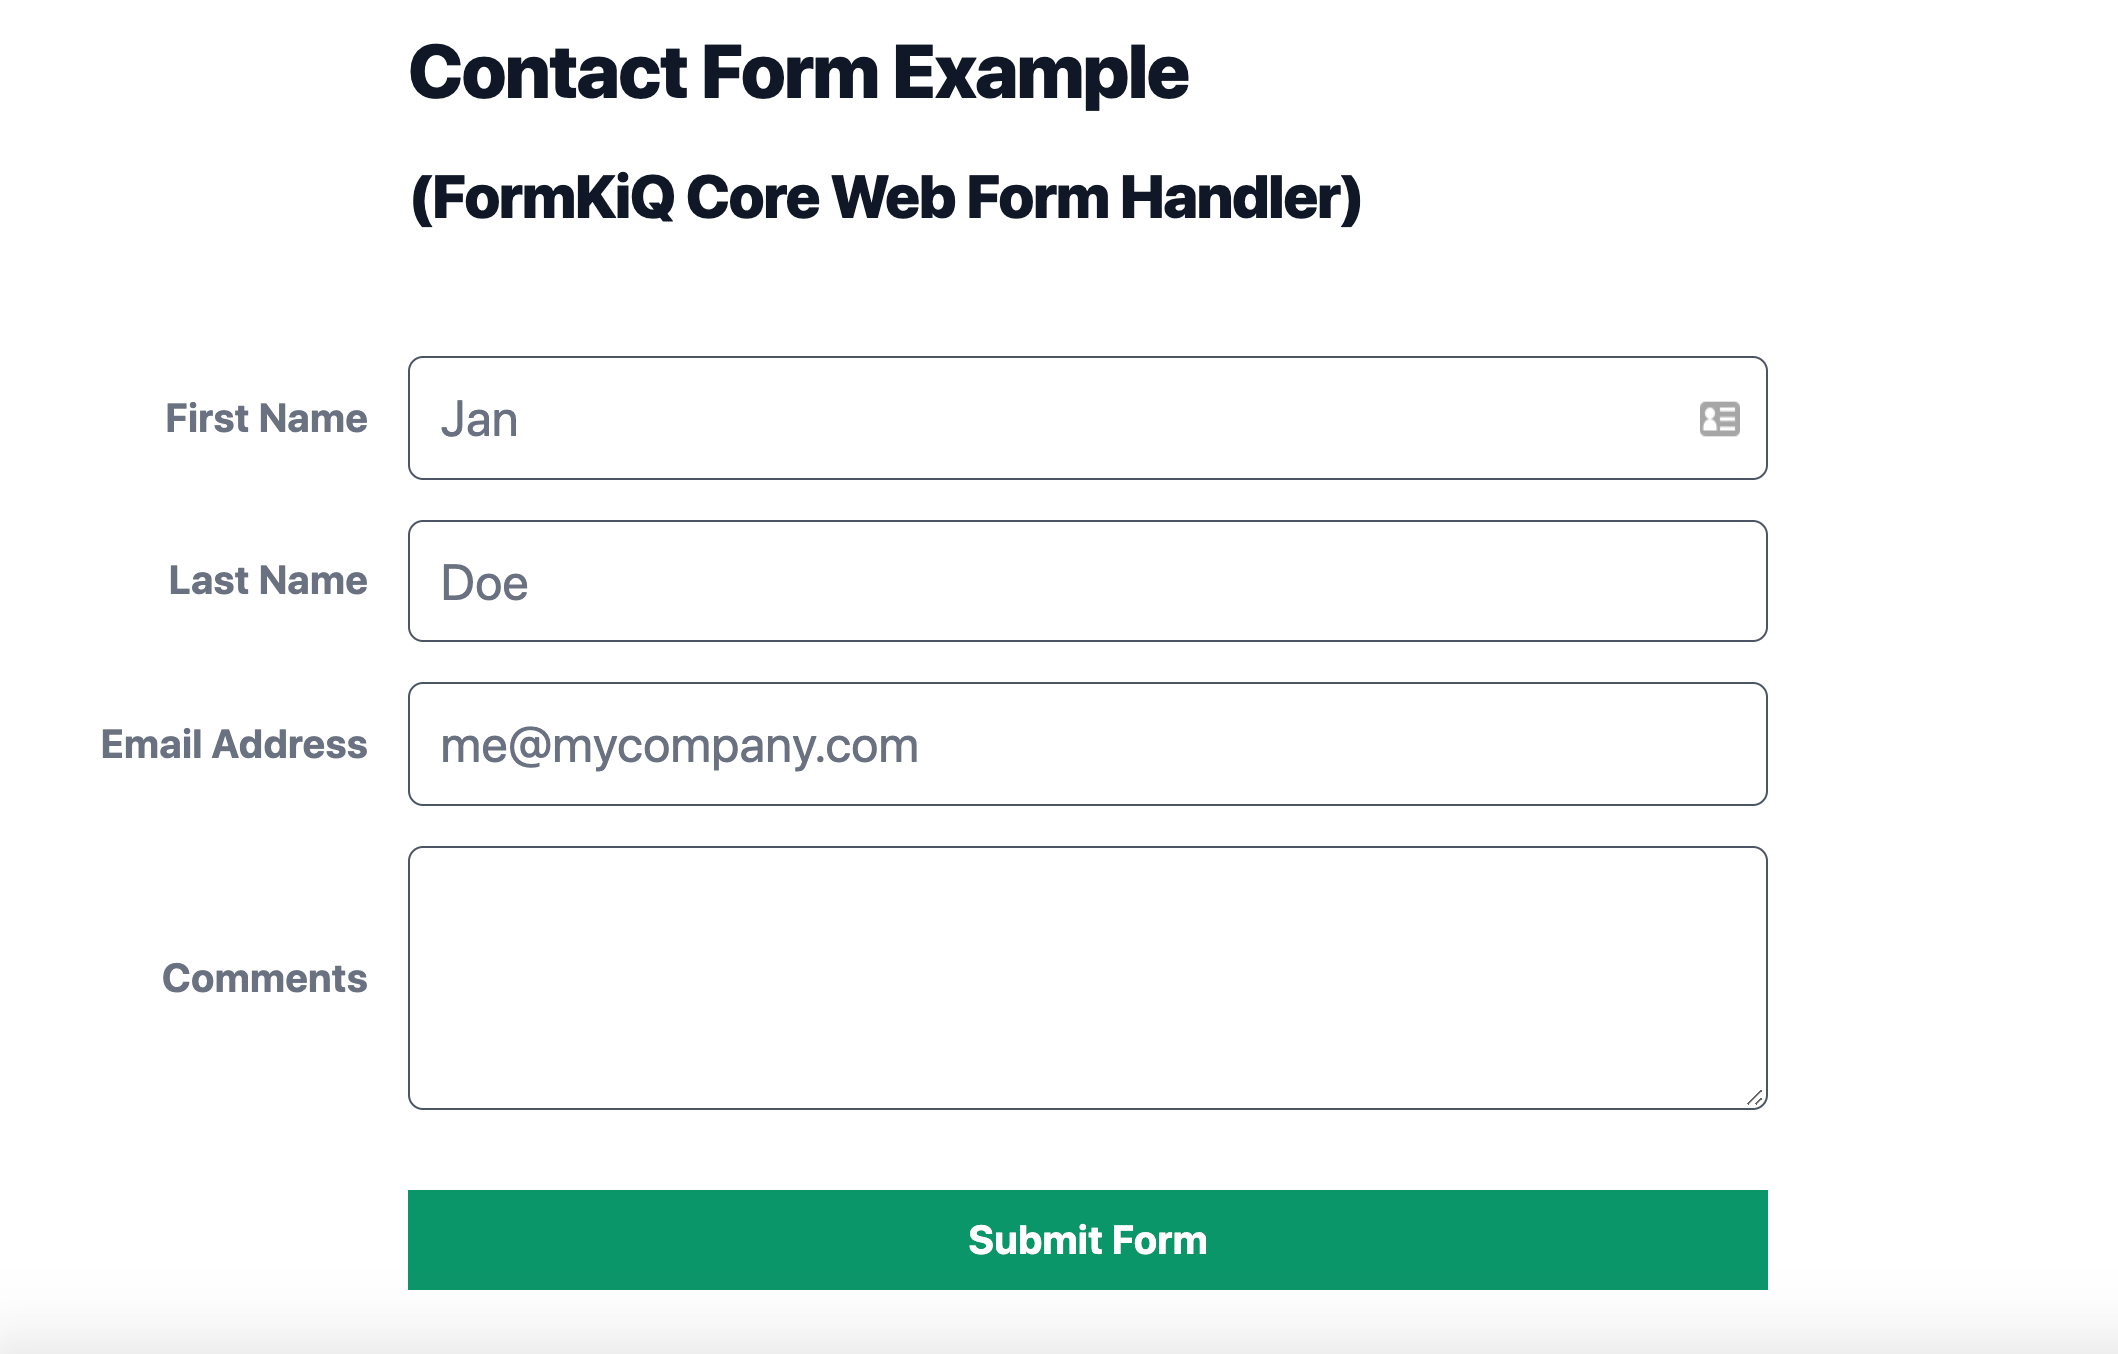 Screenshot of Contact Form Example